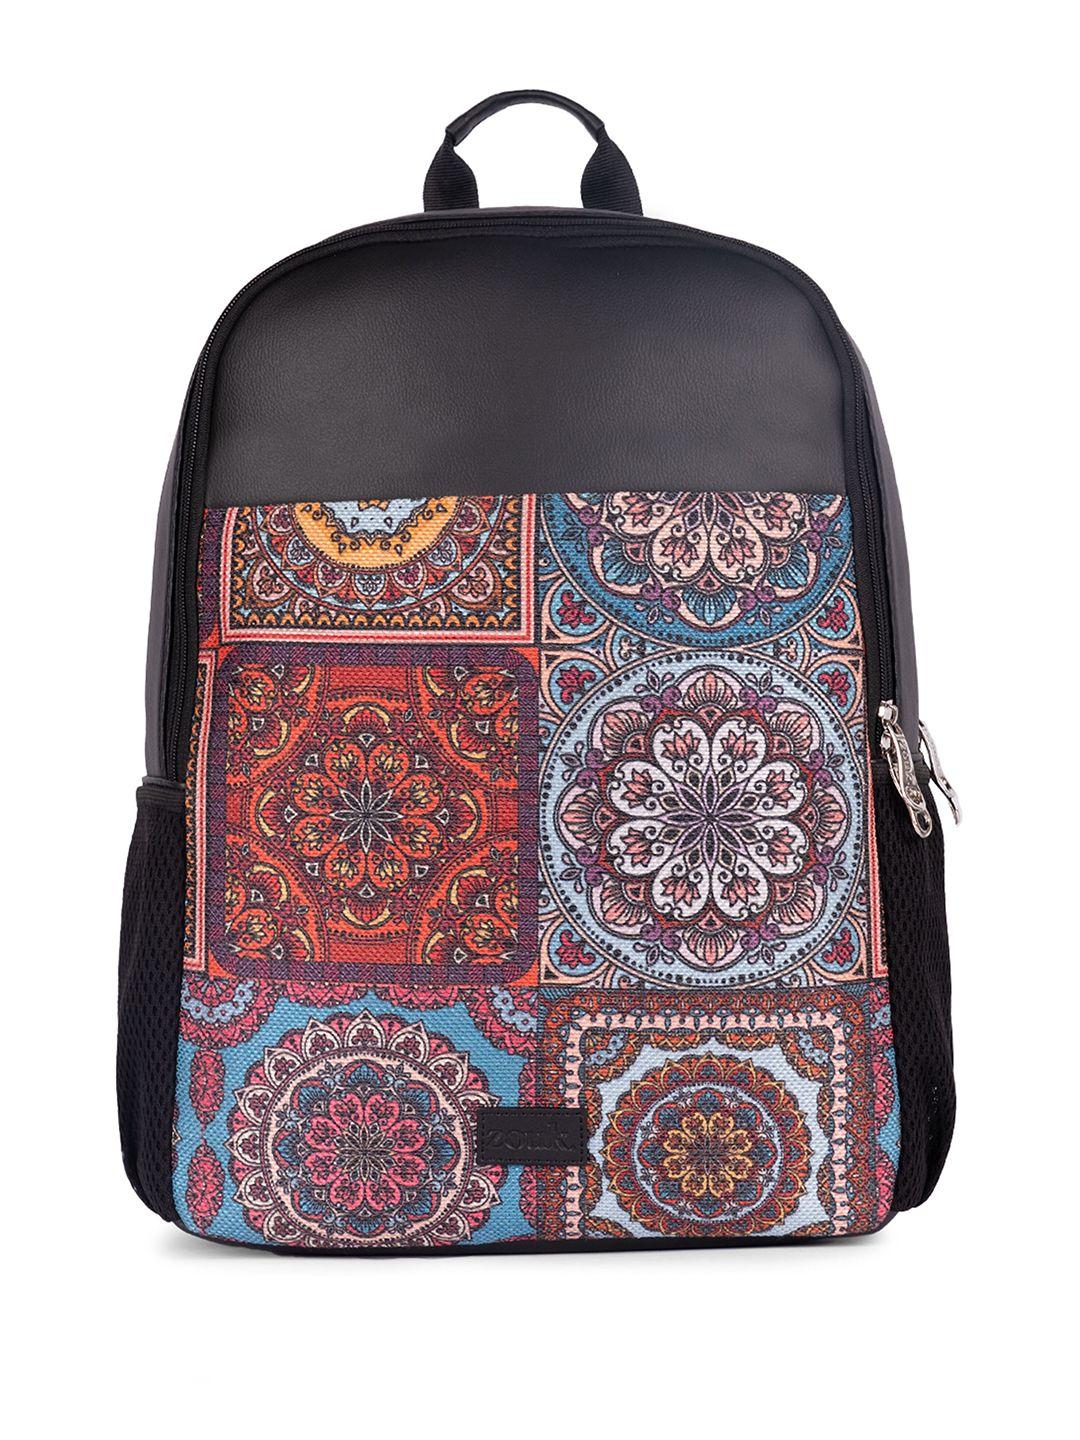 zouk unisex ethnic motifs printed water resistance backpack up to 16 inch